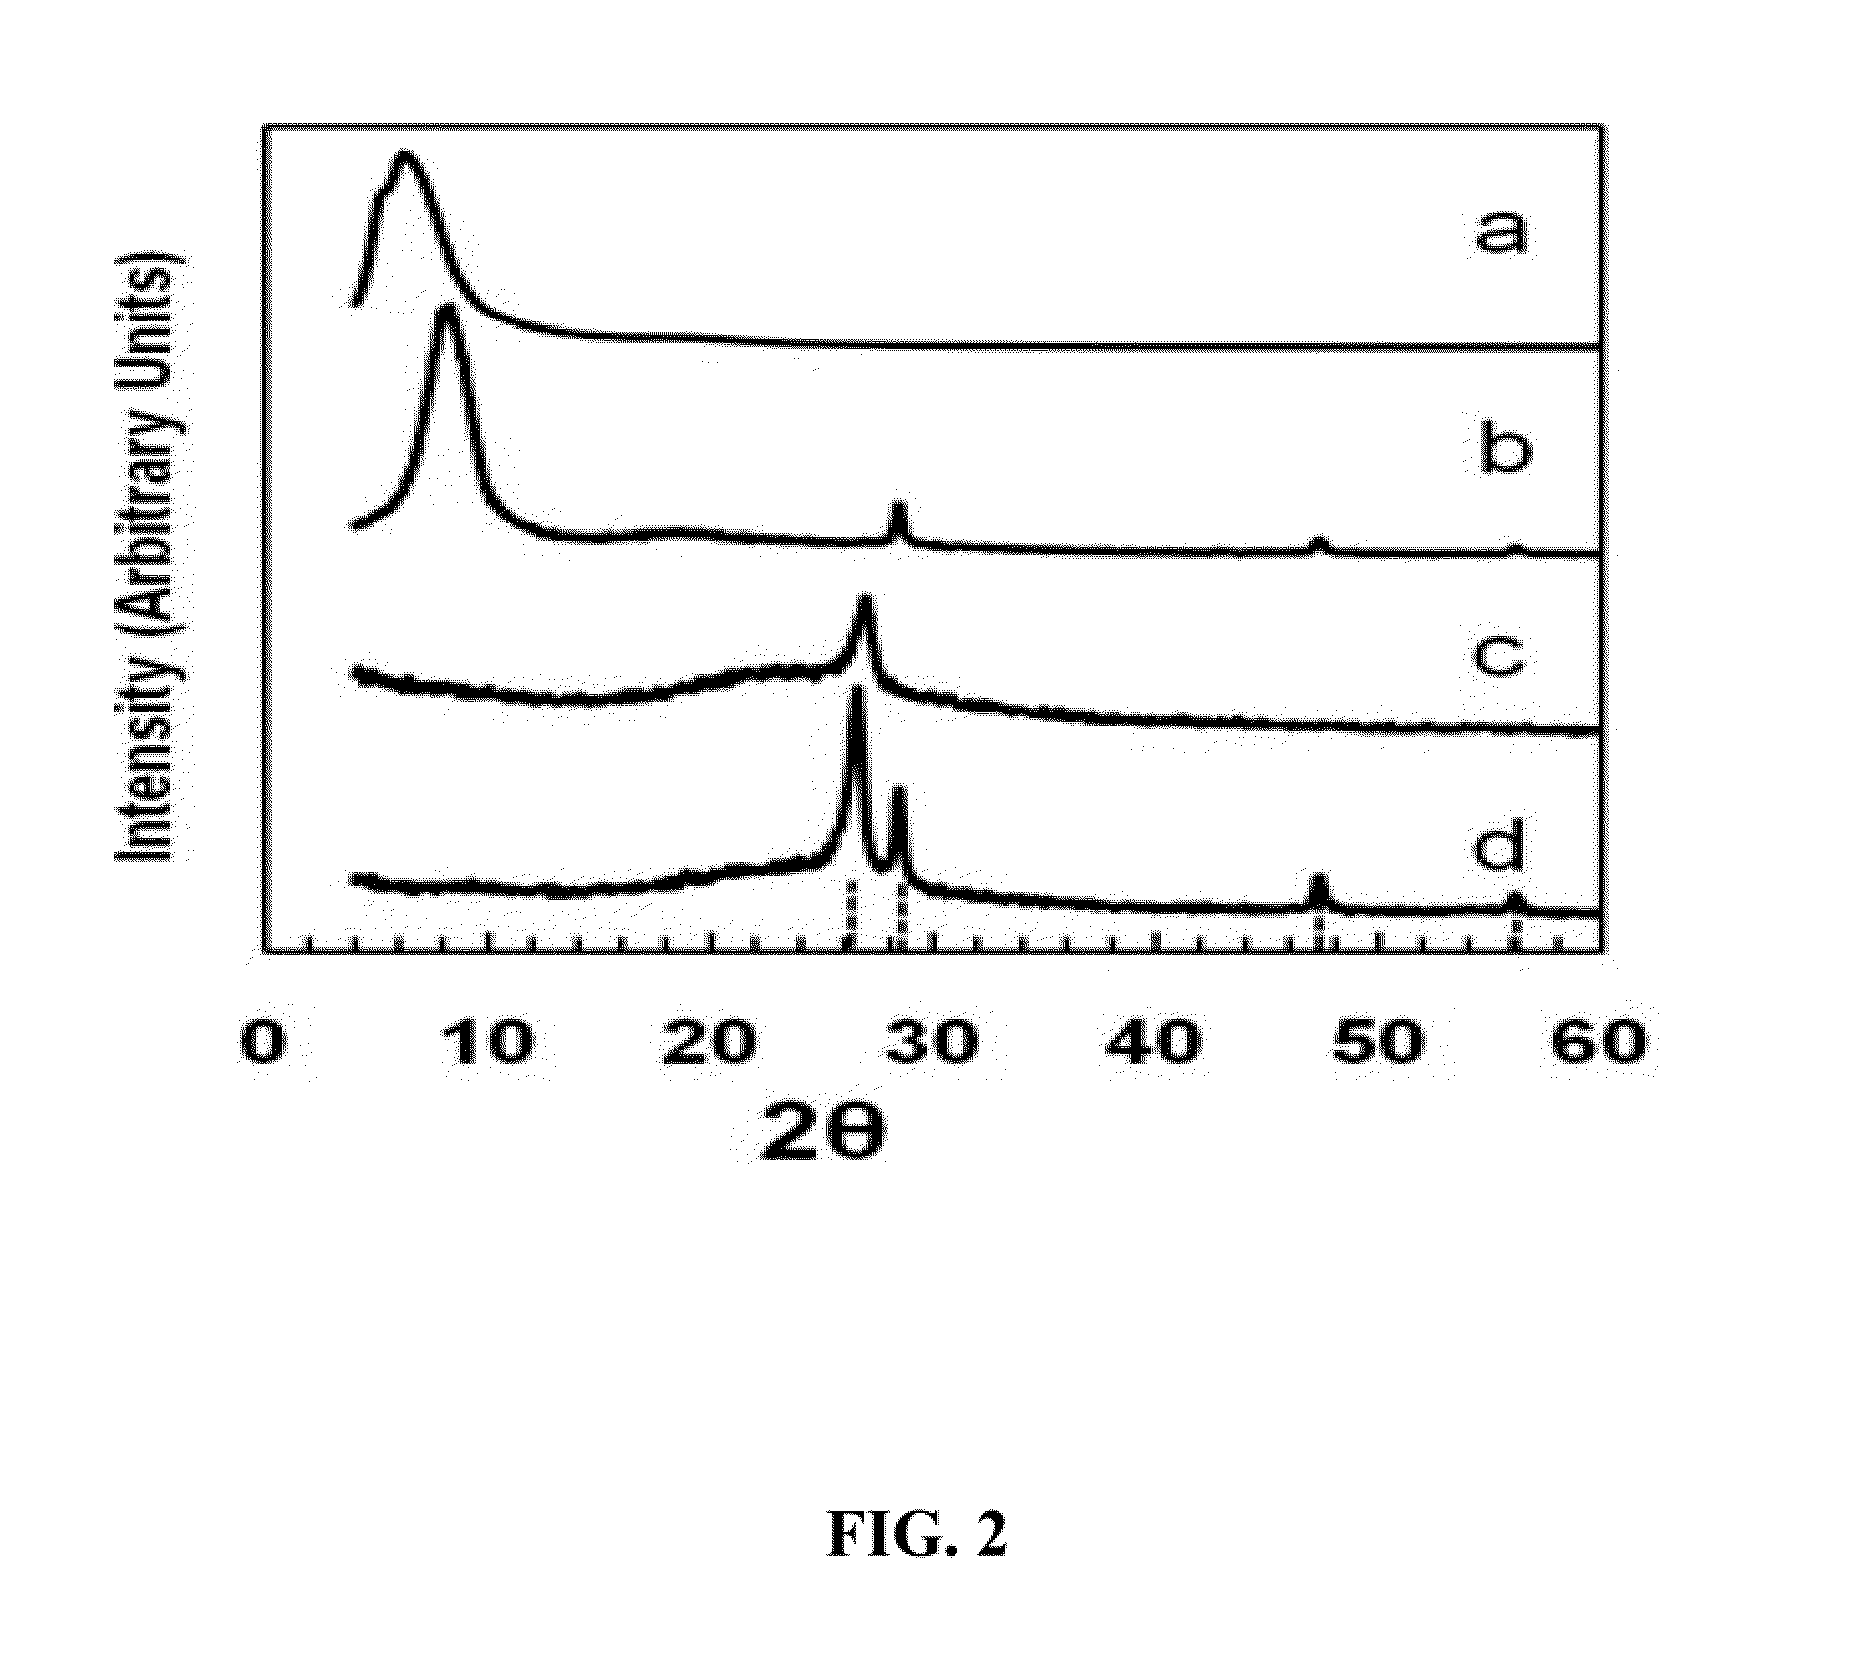 Electrode material comprising graphene composite materials in a graphite network formed from reconstituted graphene sheets